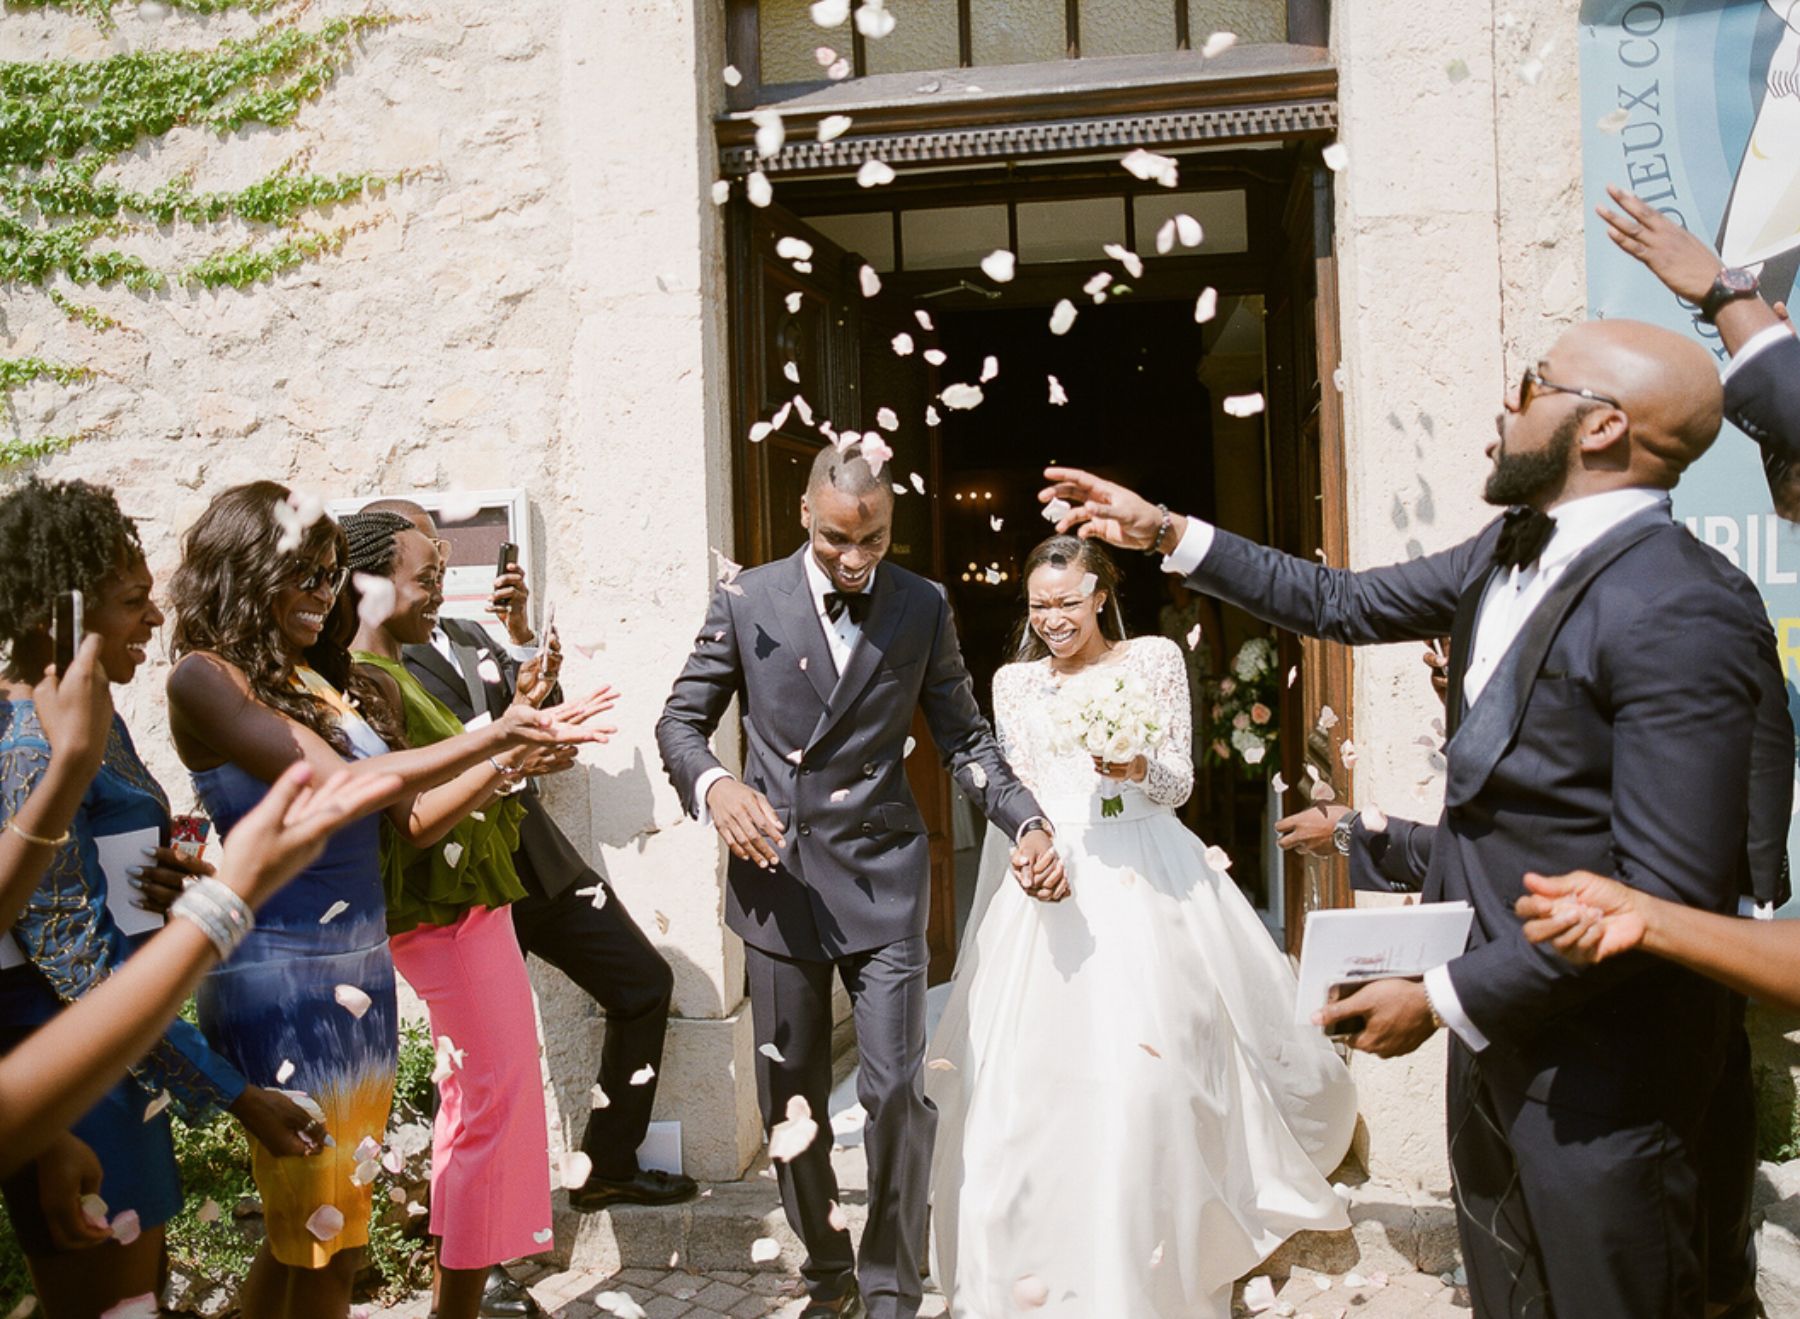 Bride and groom leaving the ceremony while guest throw rose petals